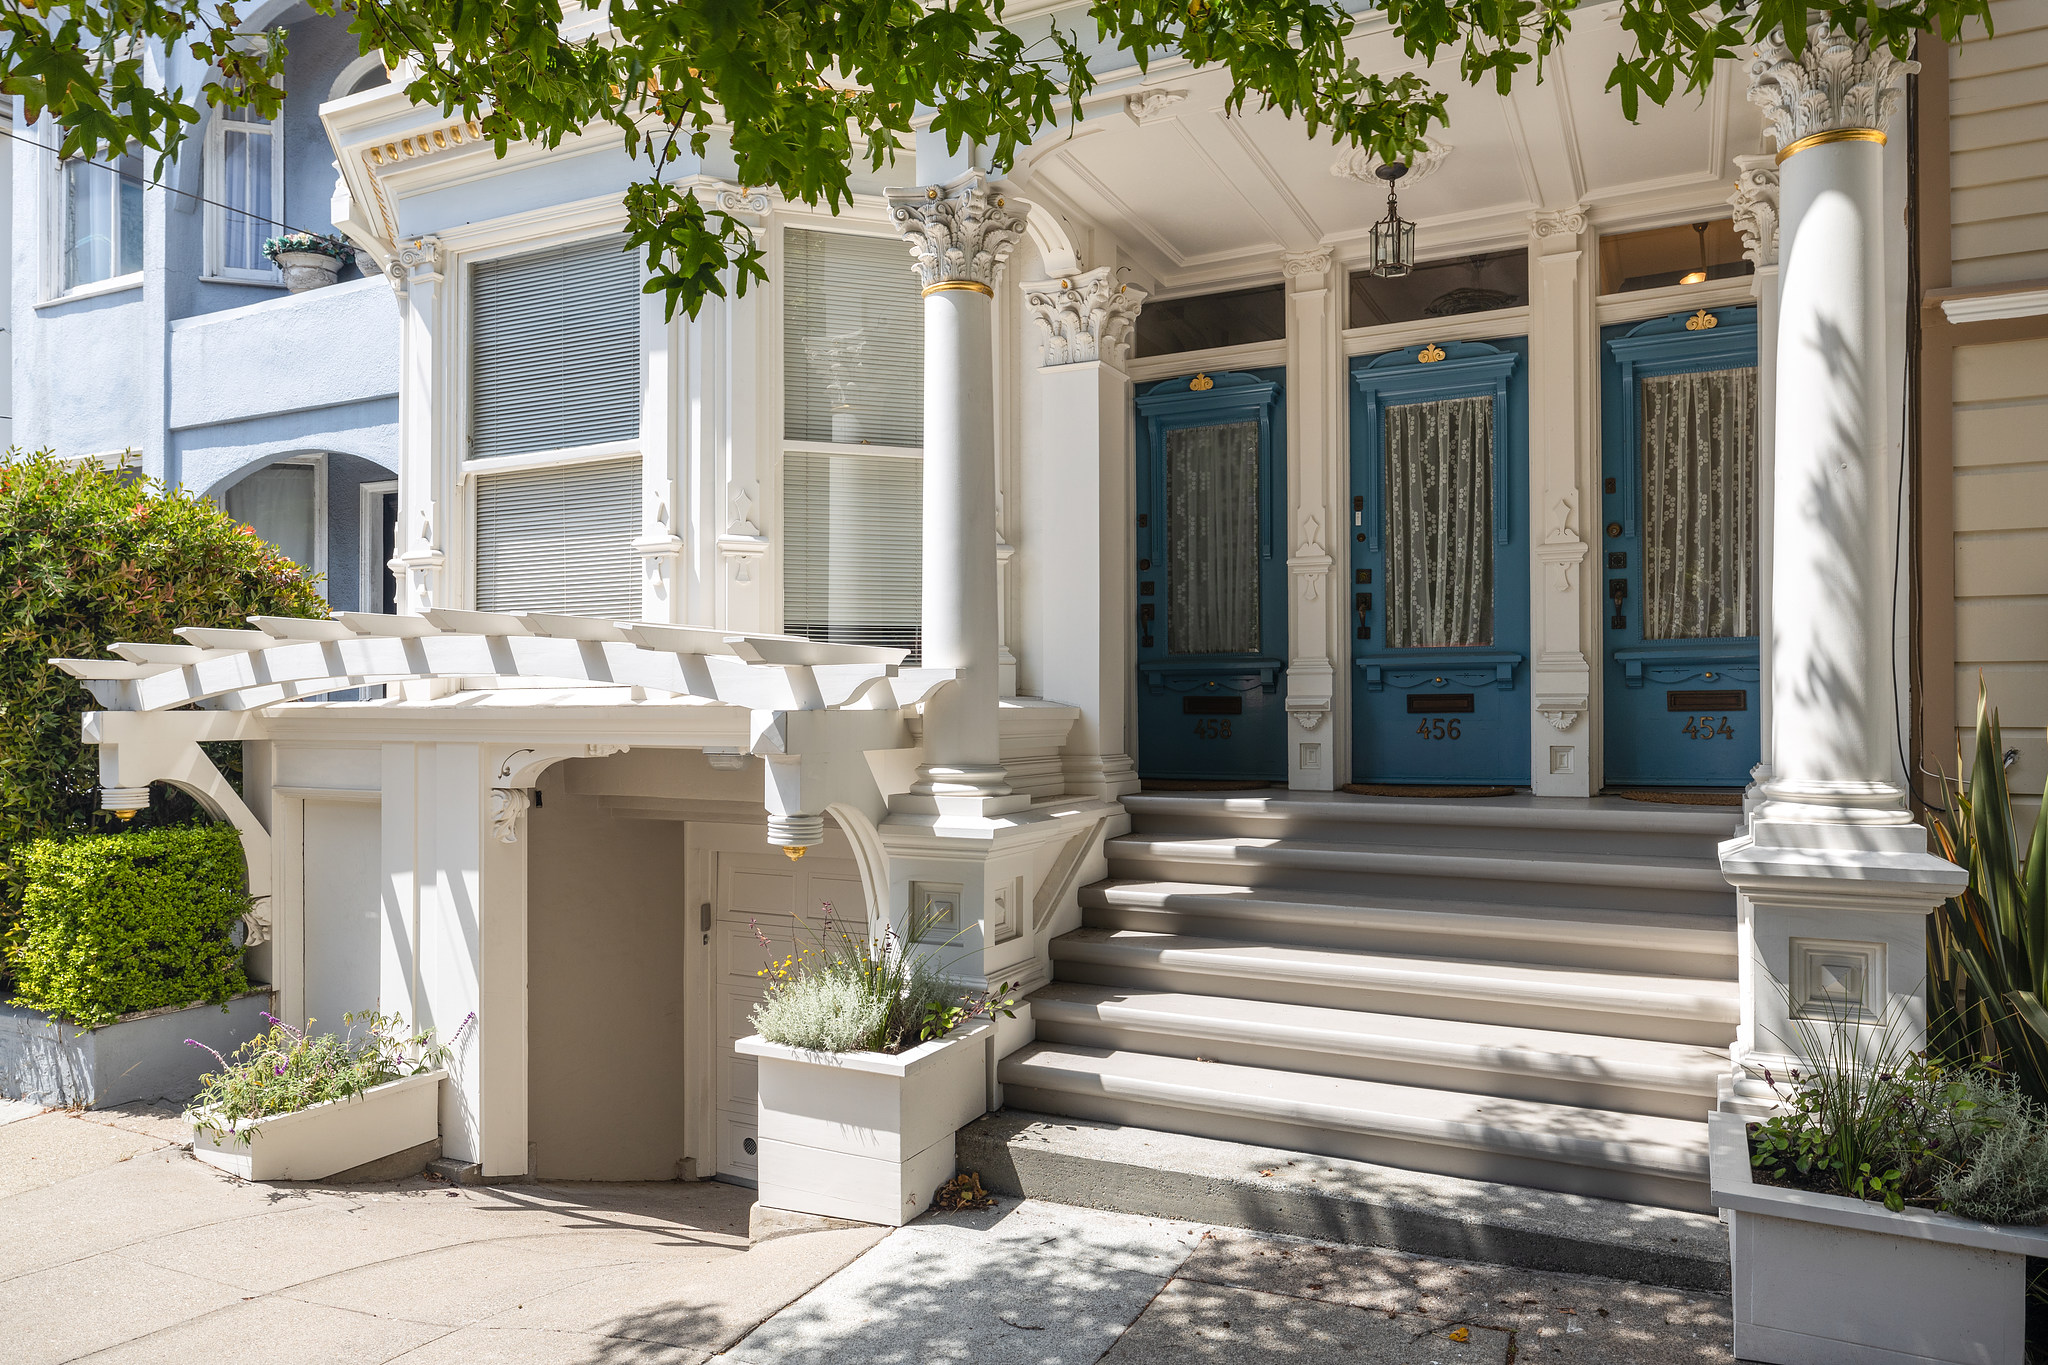 Property Photo: Front entry to 454 Frederick Street, showing three blue doors